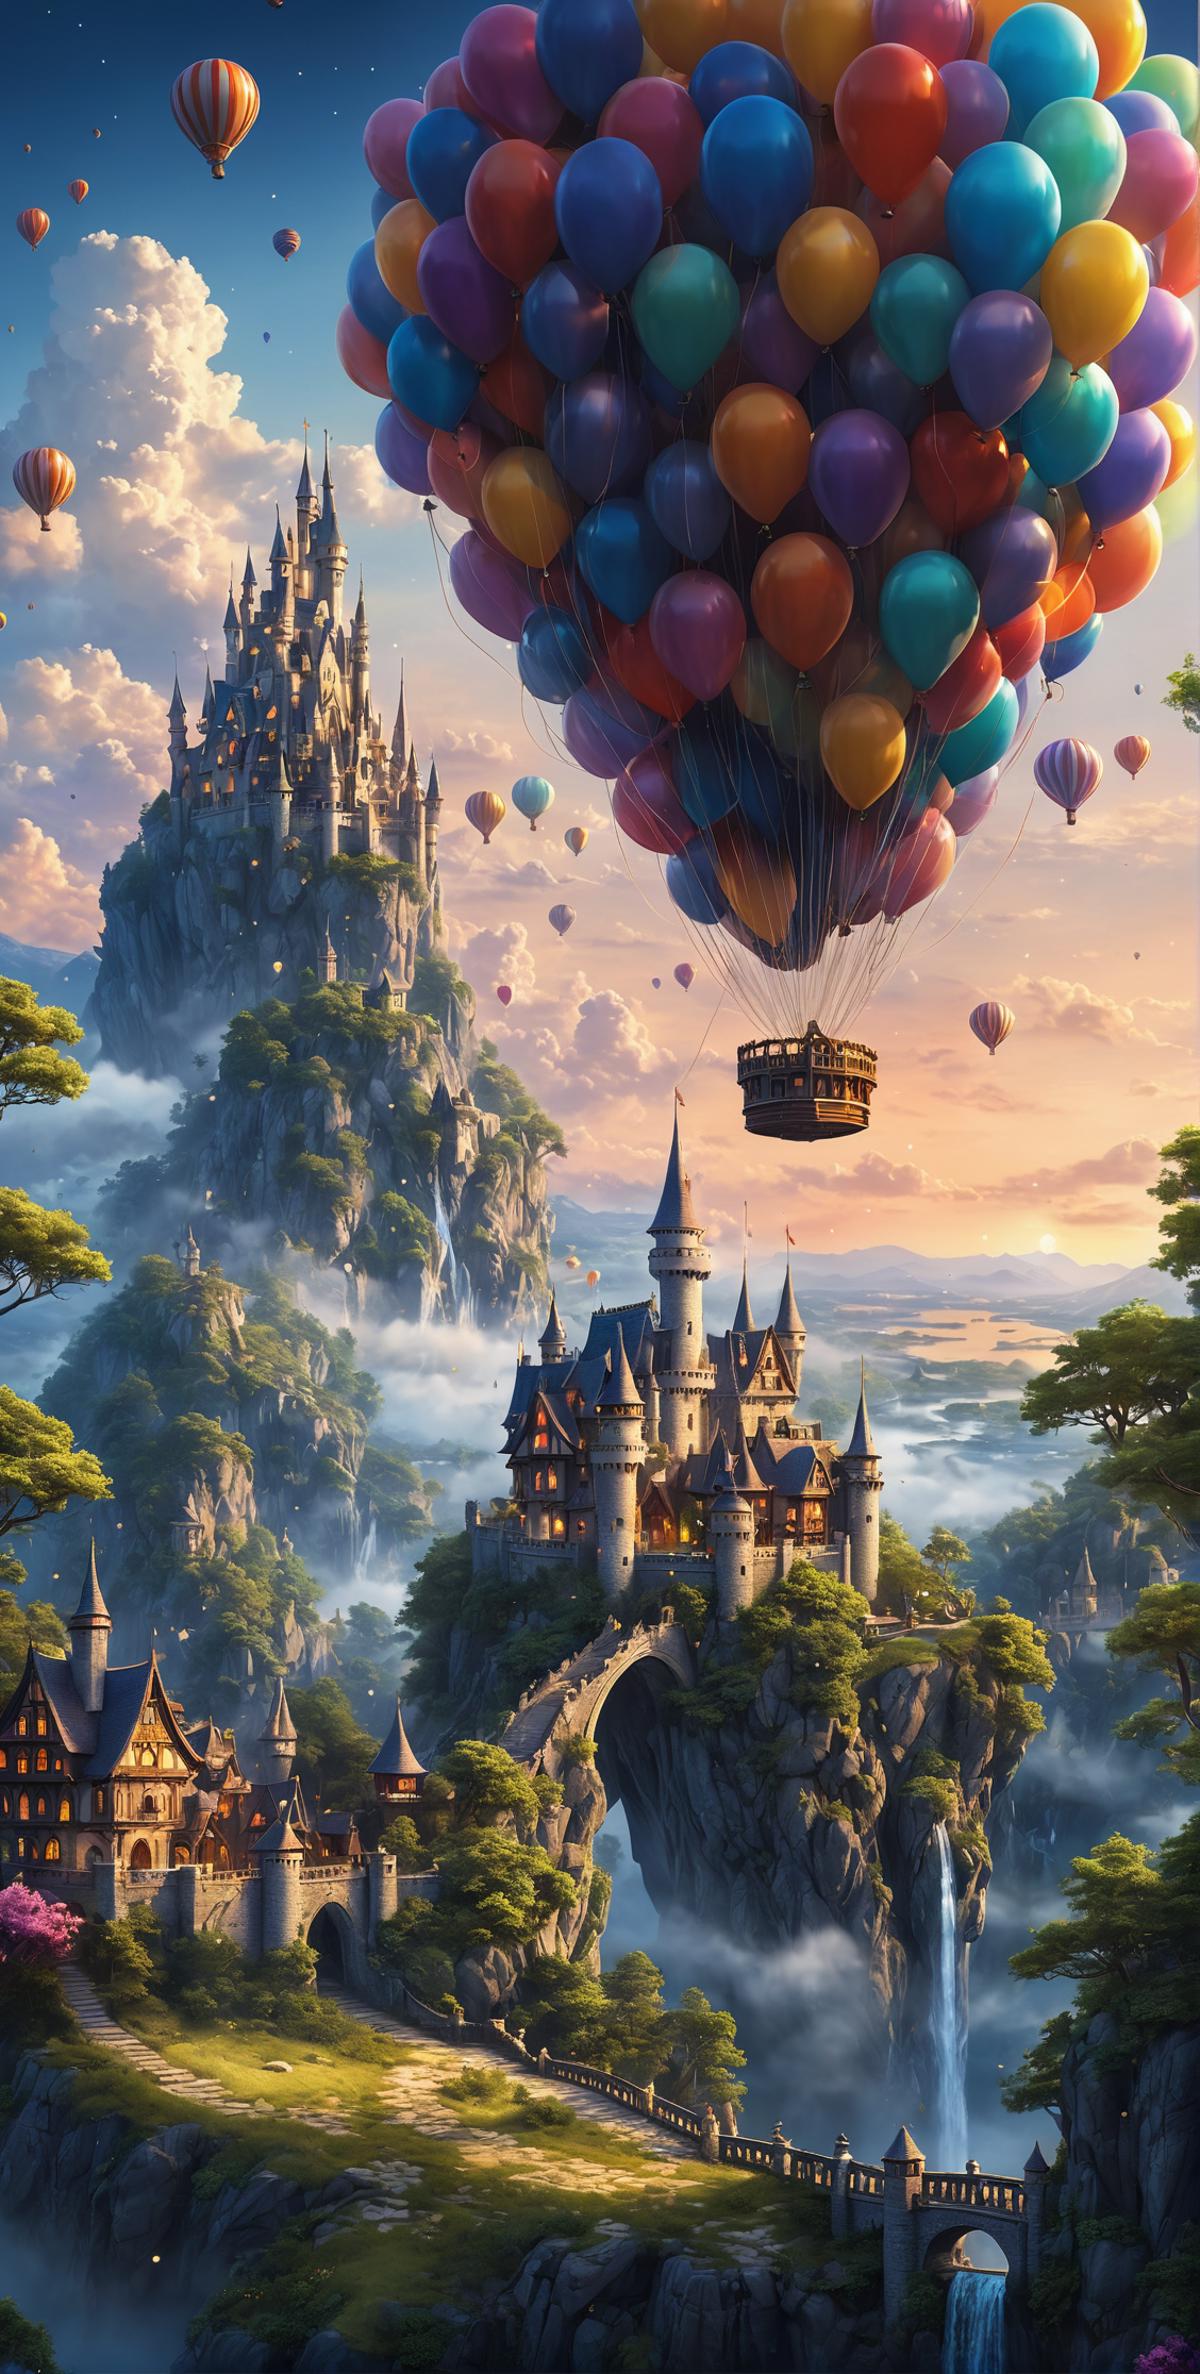 A colorful hot air balloon flying over a castle with a moat and a forest in the background.